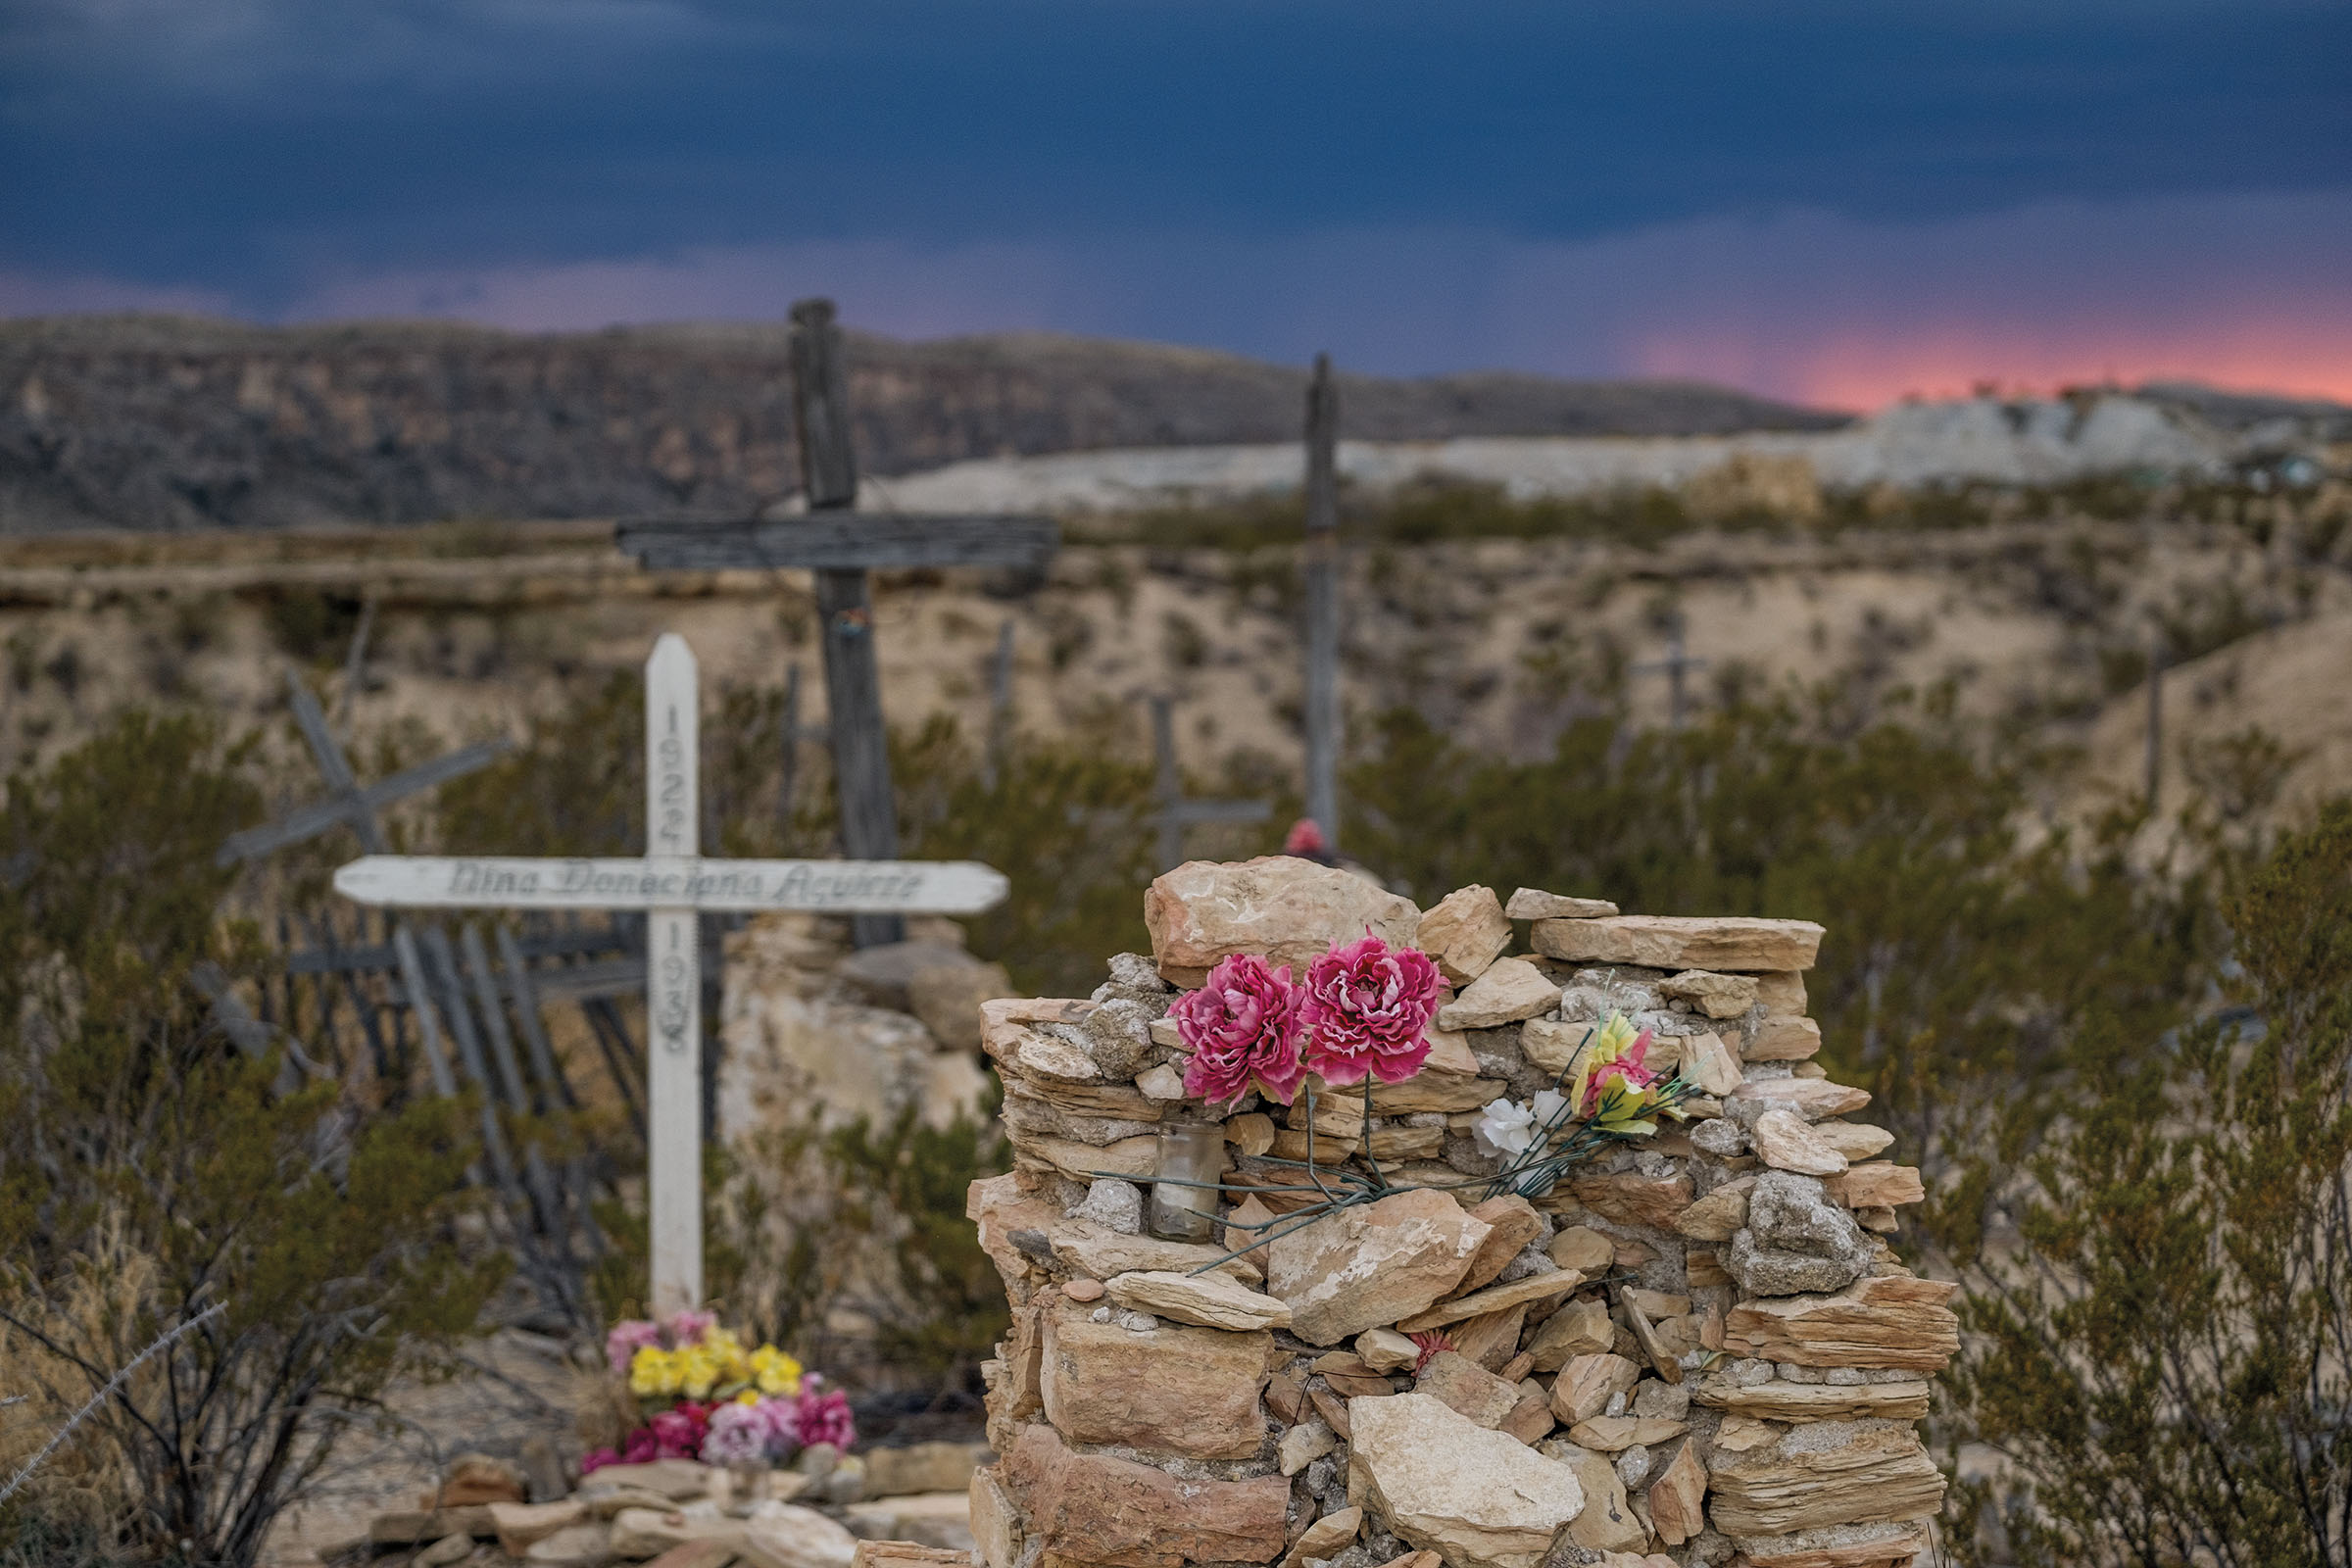 A gravesite with a white cross and flowers on rocks